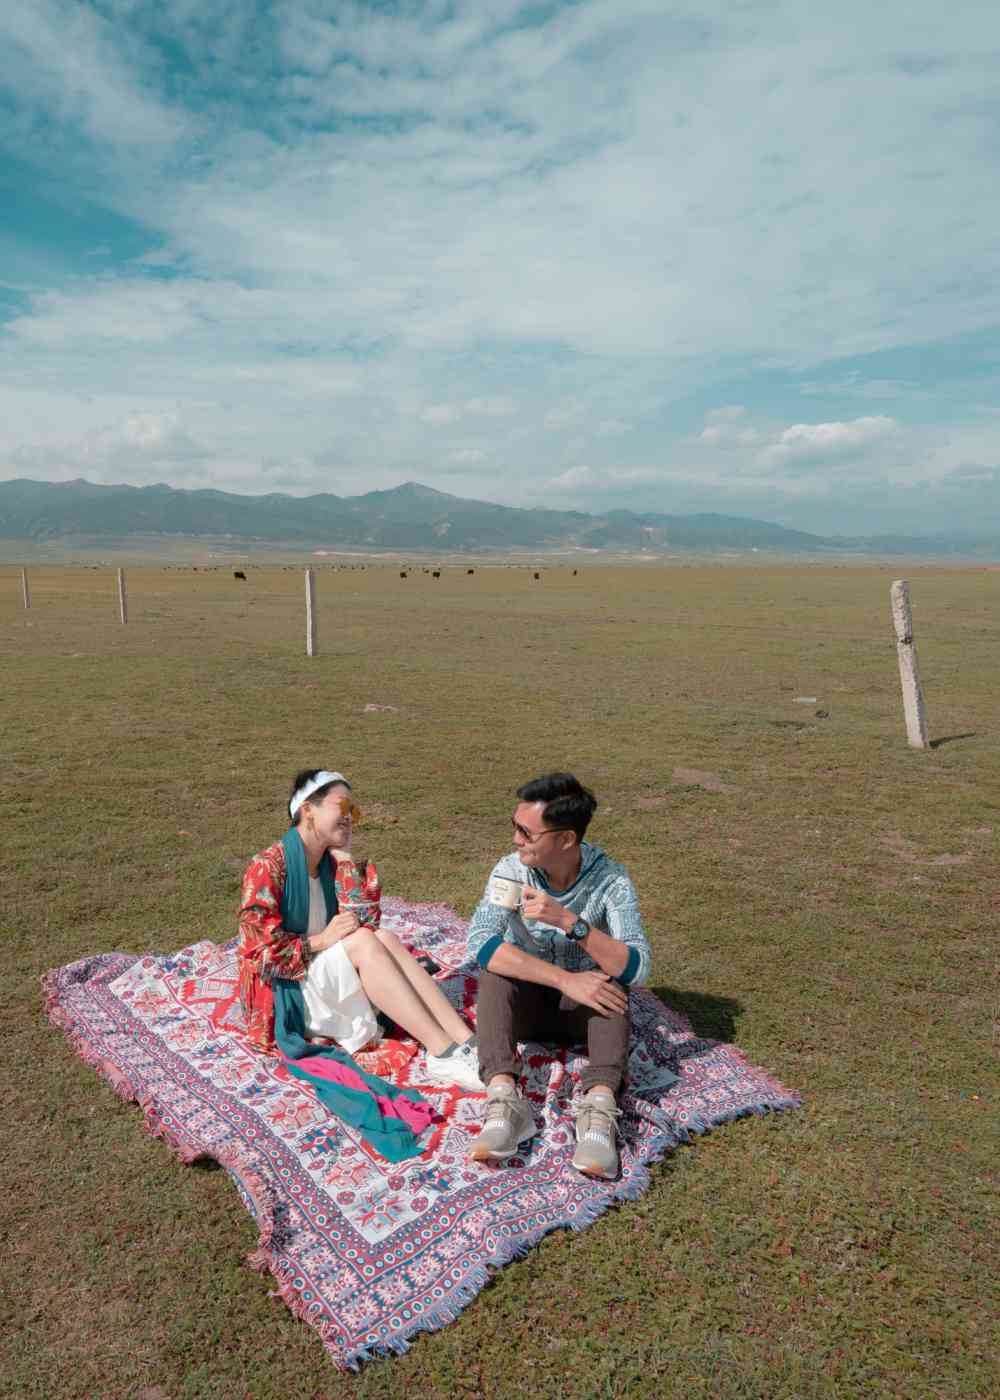 Kingssleeve Travel Issue Alston Lim x Kingssleeve Picnic at Qinghai 1 - 旅游特辑 Traveler’s Stories (EP2)：Alston 林泽辉